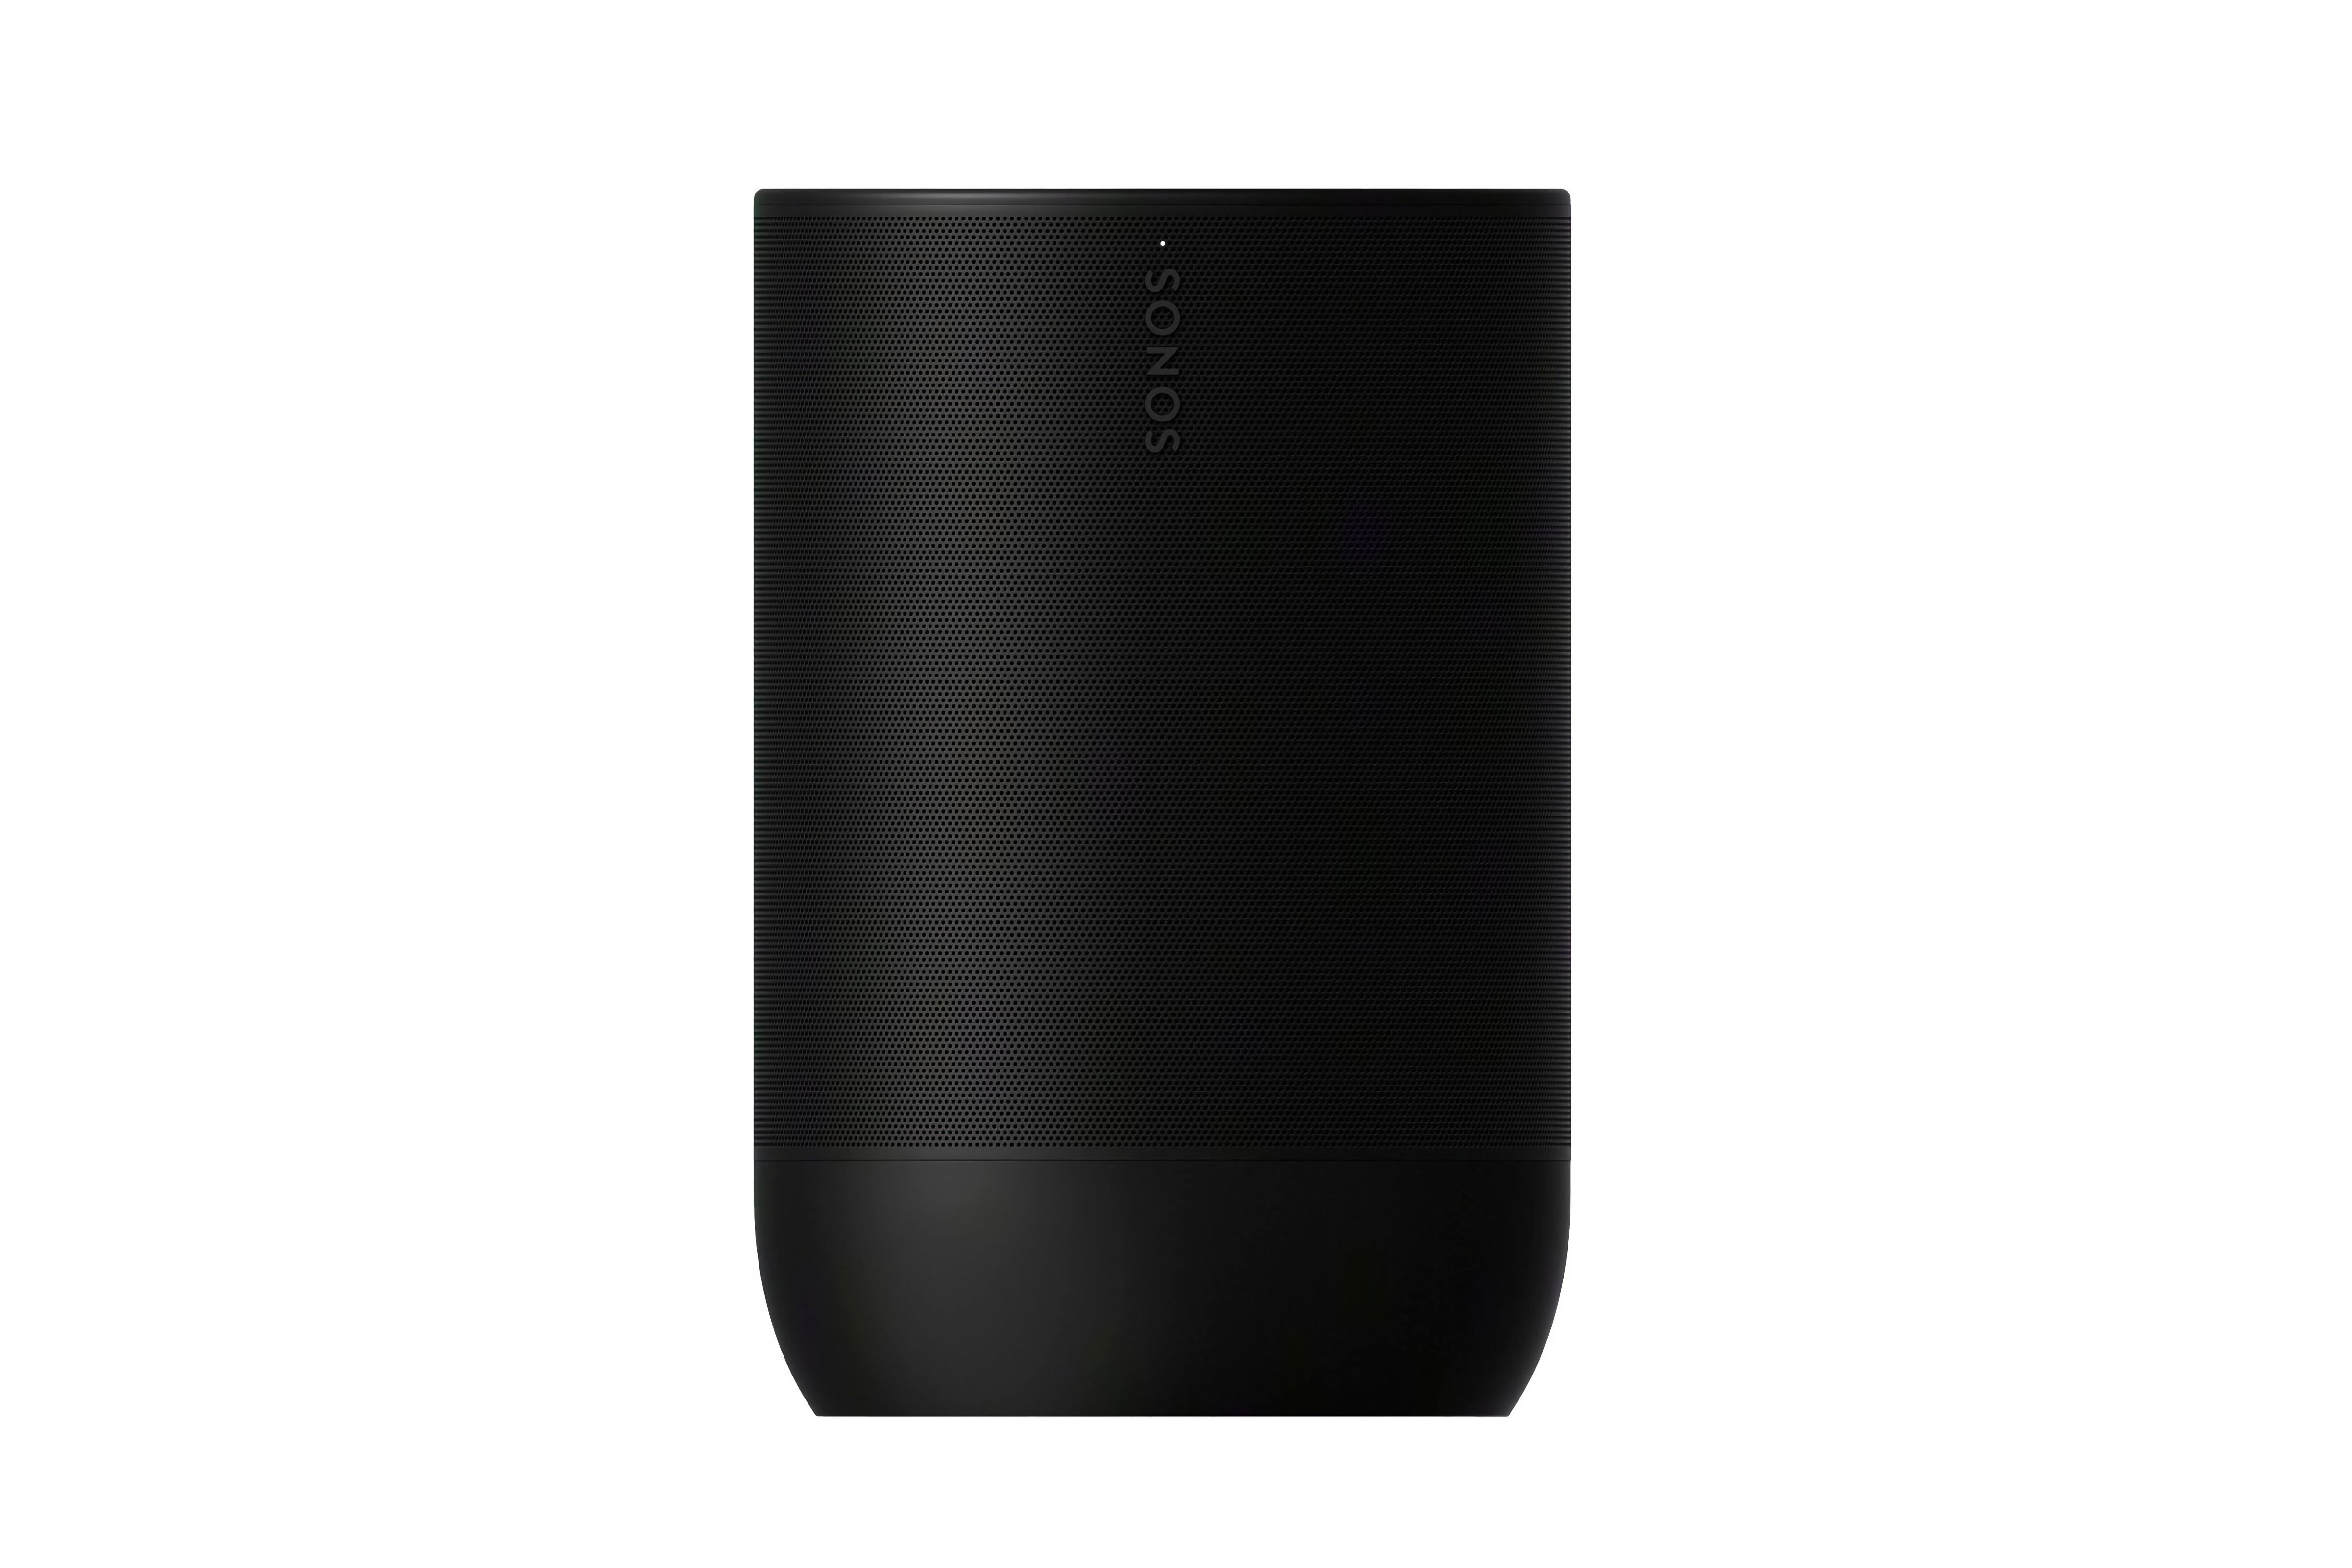 A black Sonos speaker with rounded sides and a flat top.